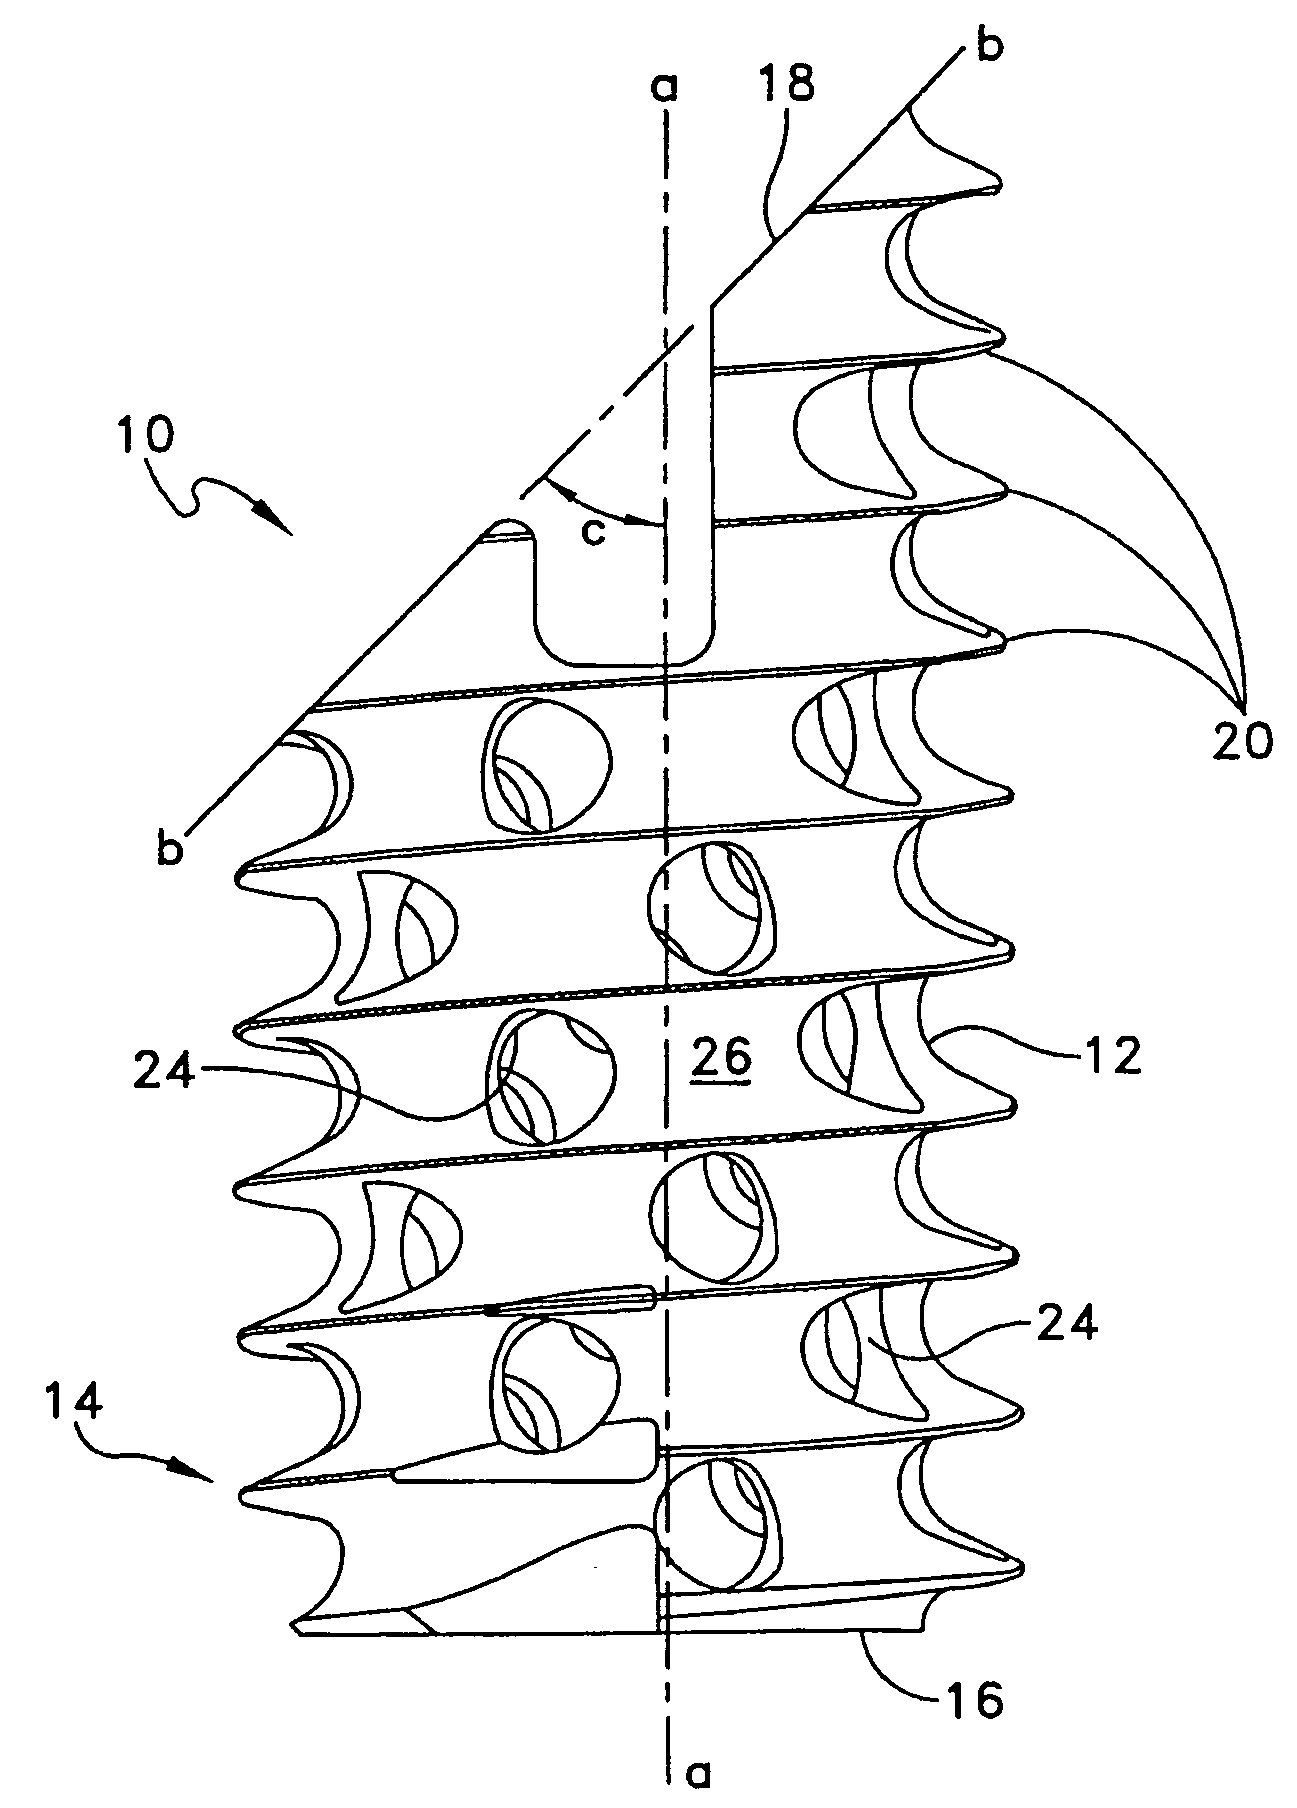 Fixation screw, graft ligament anchor assembly, and method for securing a graft ligament in a bone tunnel